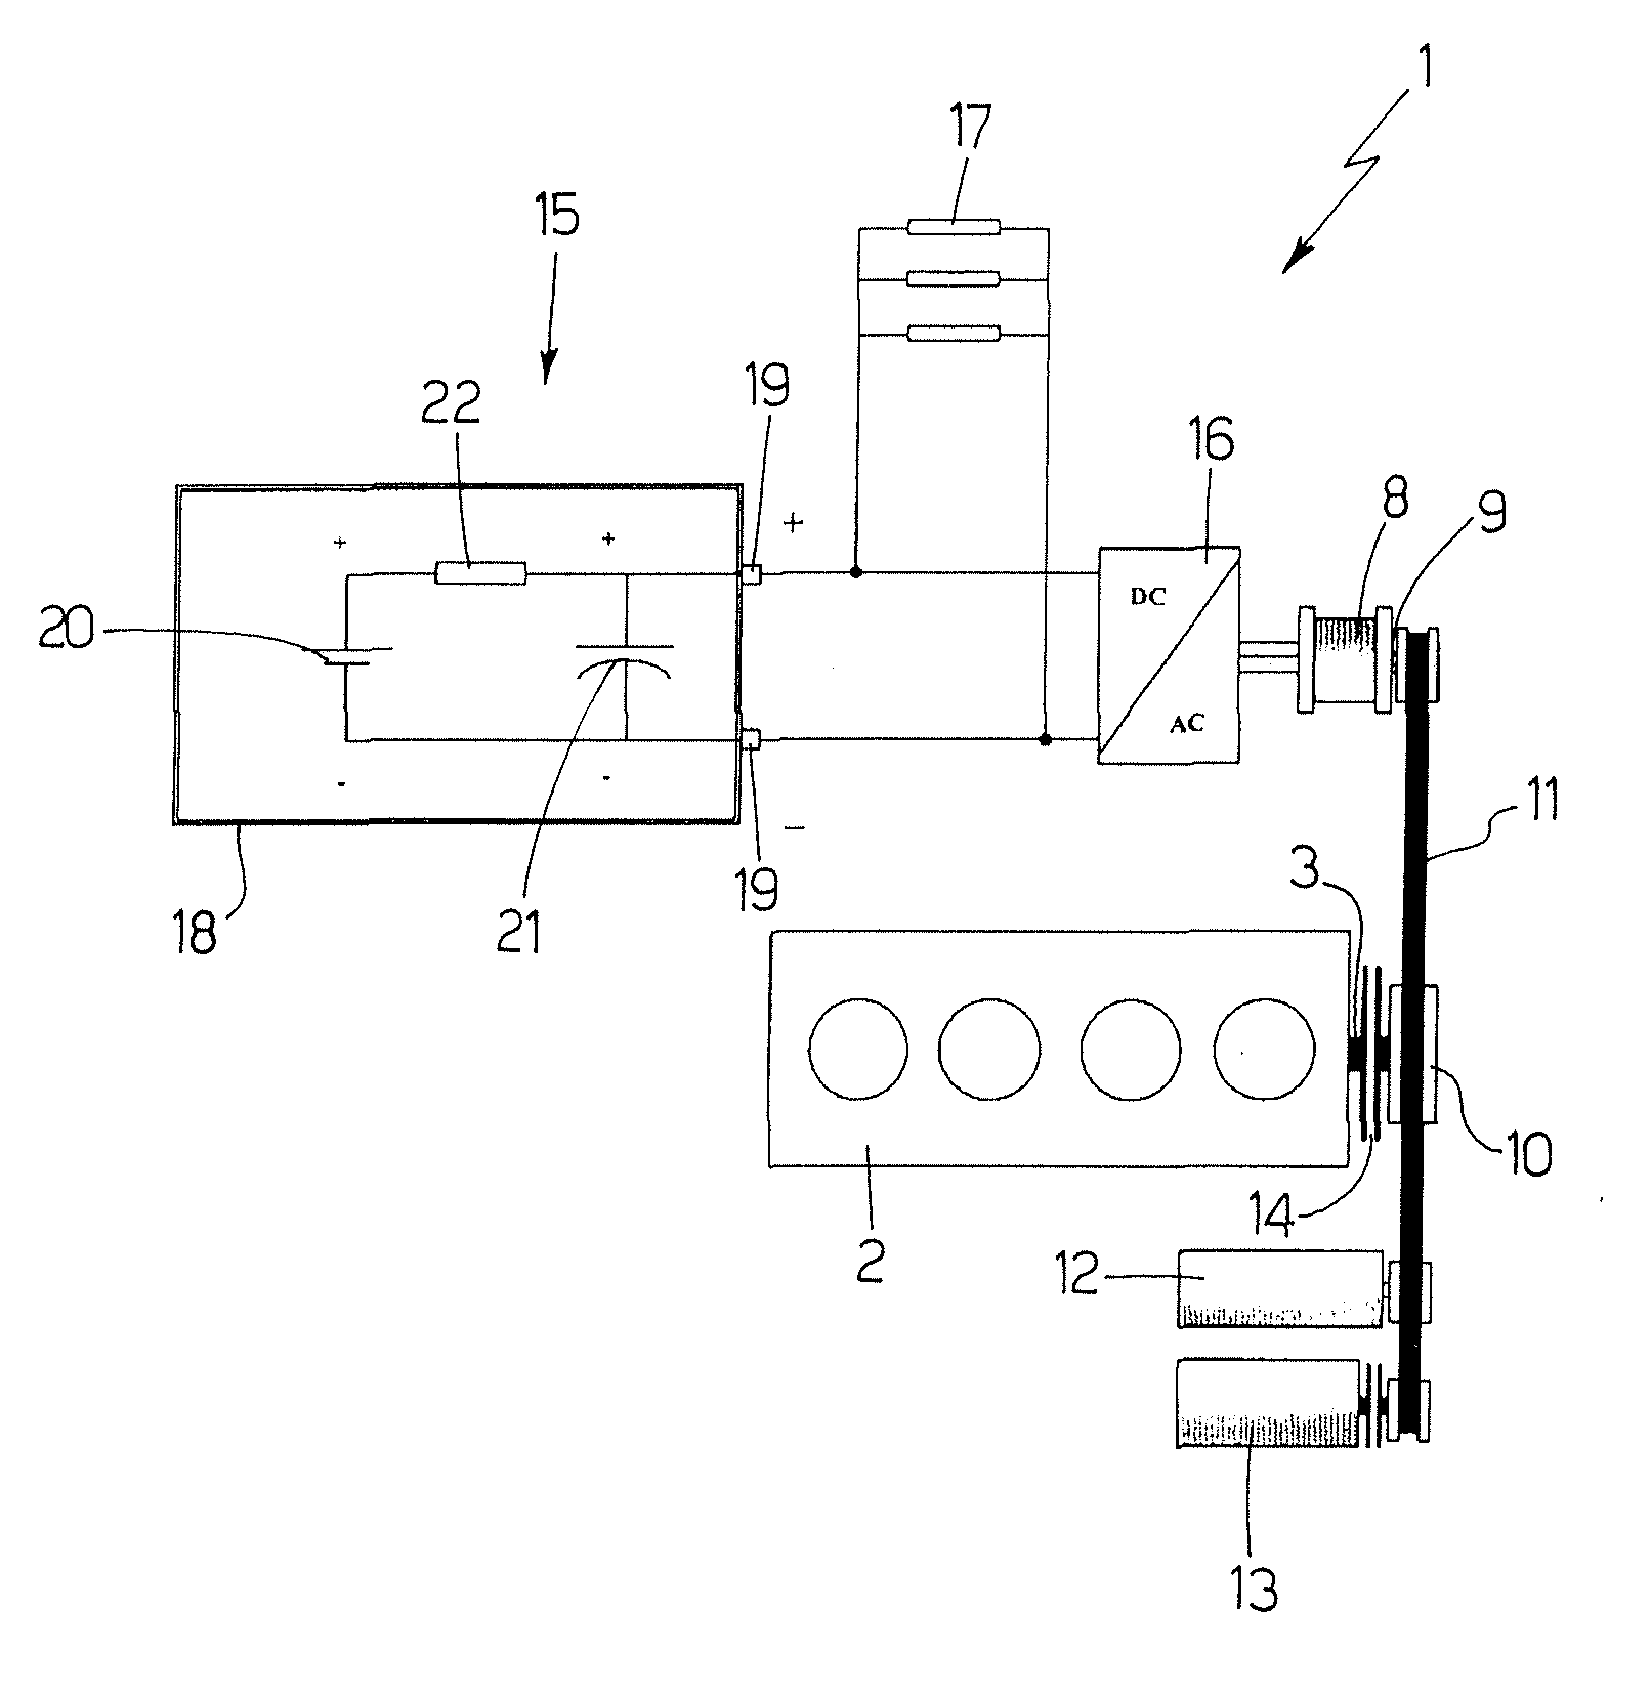 Energy storage system for powering vehicle electric user devices